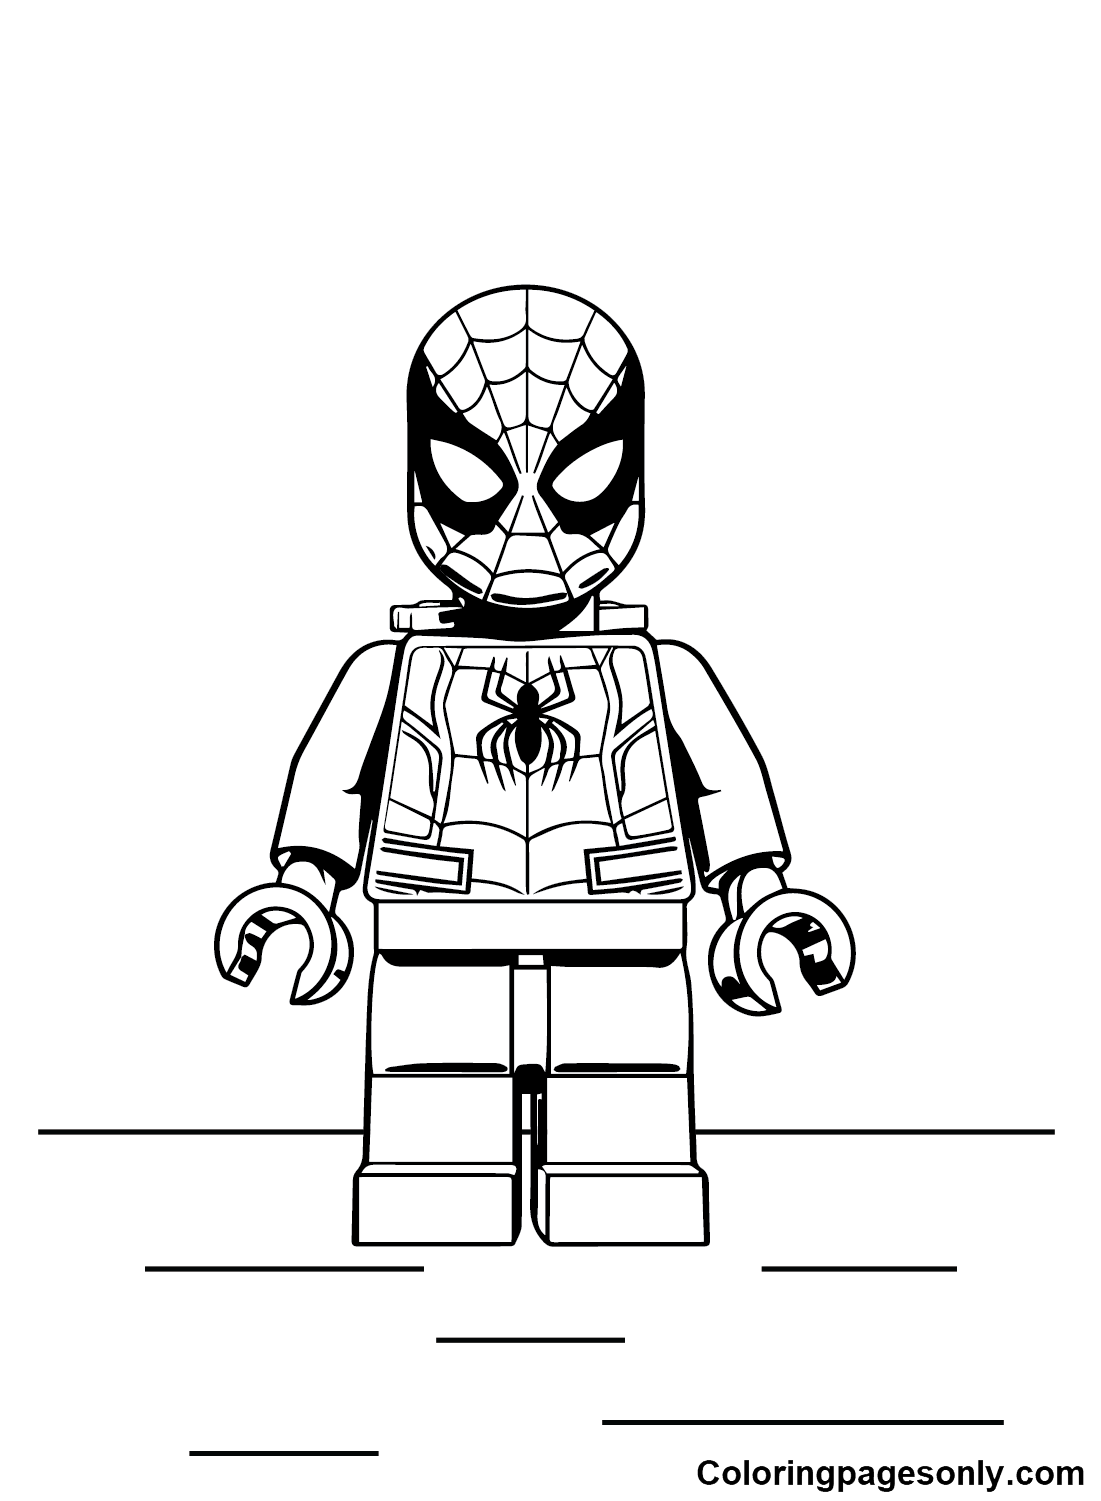 Lego Spiderman Toys Coloring Page